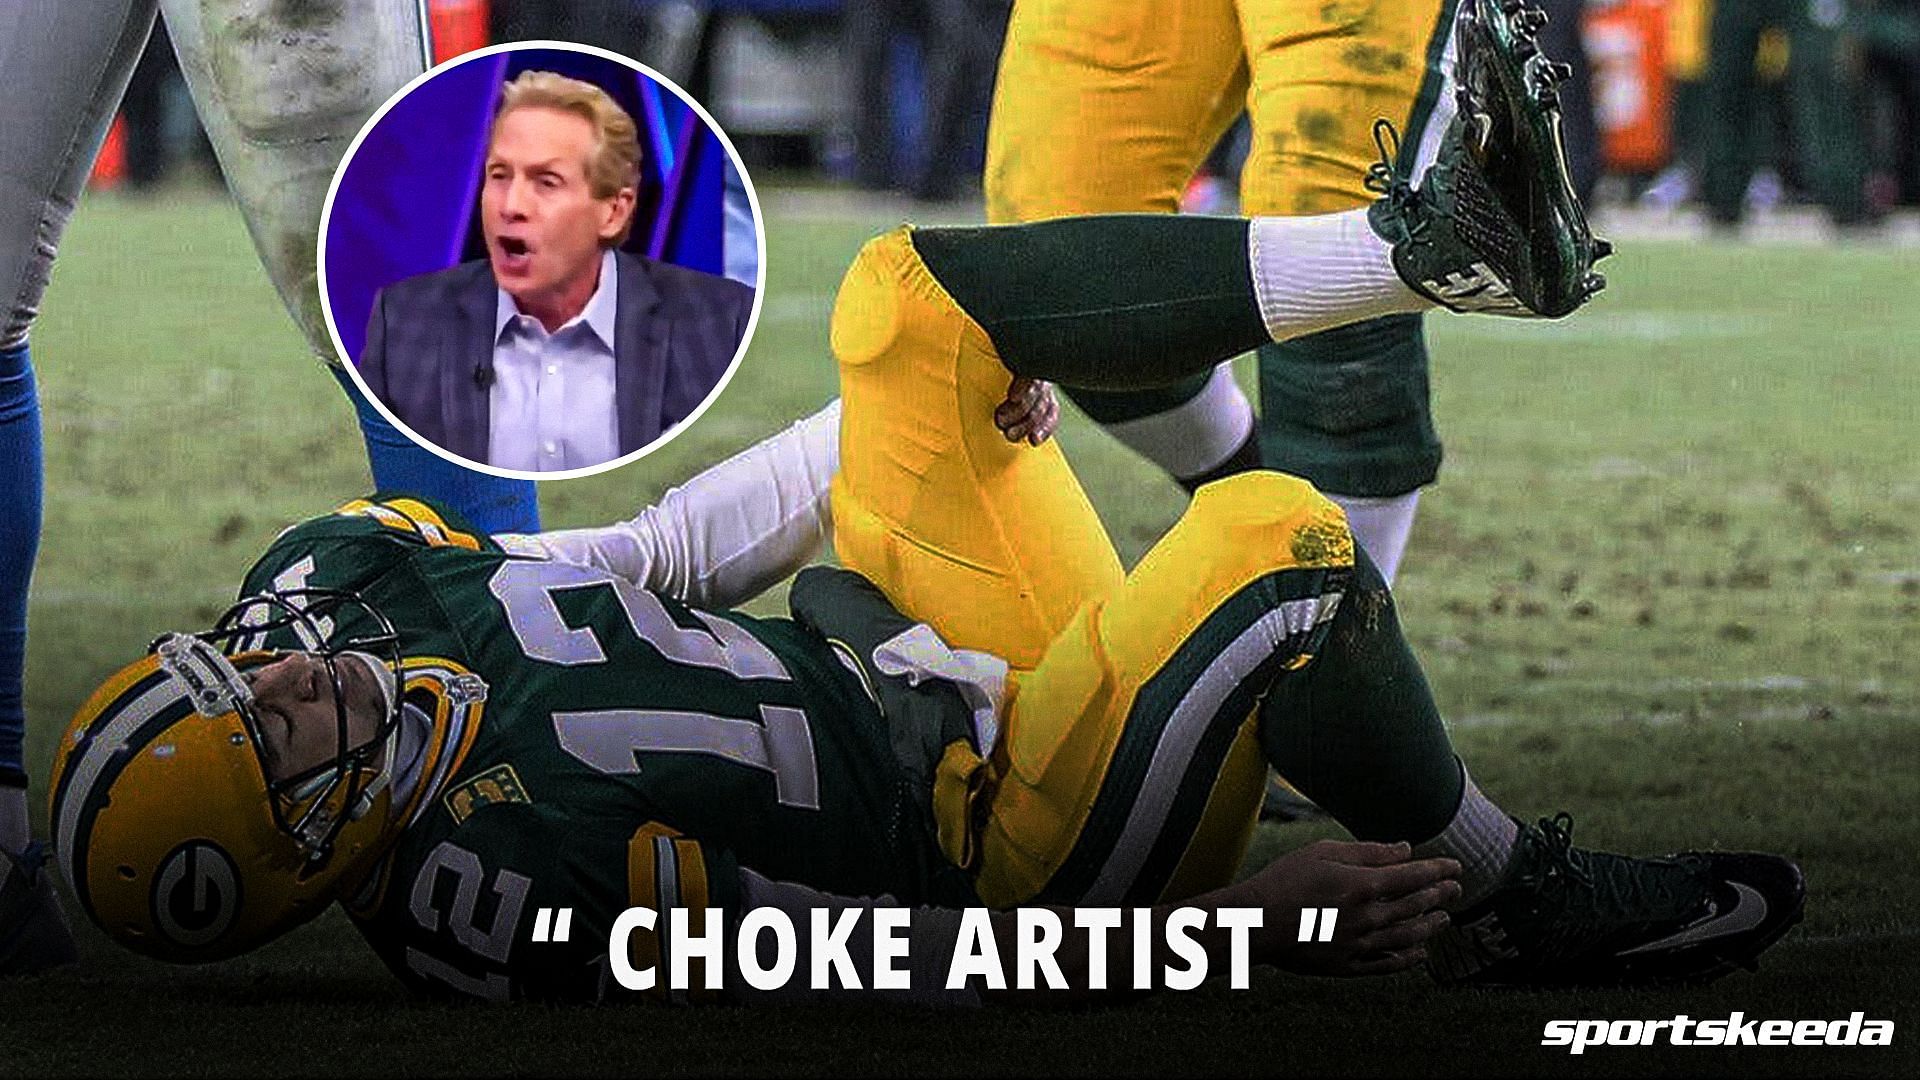 Skip Bayless goes off on Aaron Rodgers once again